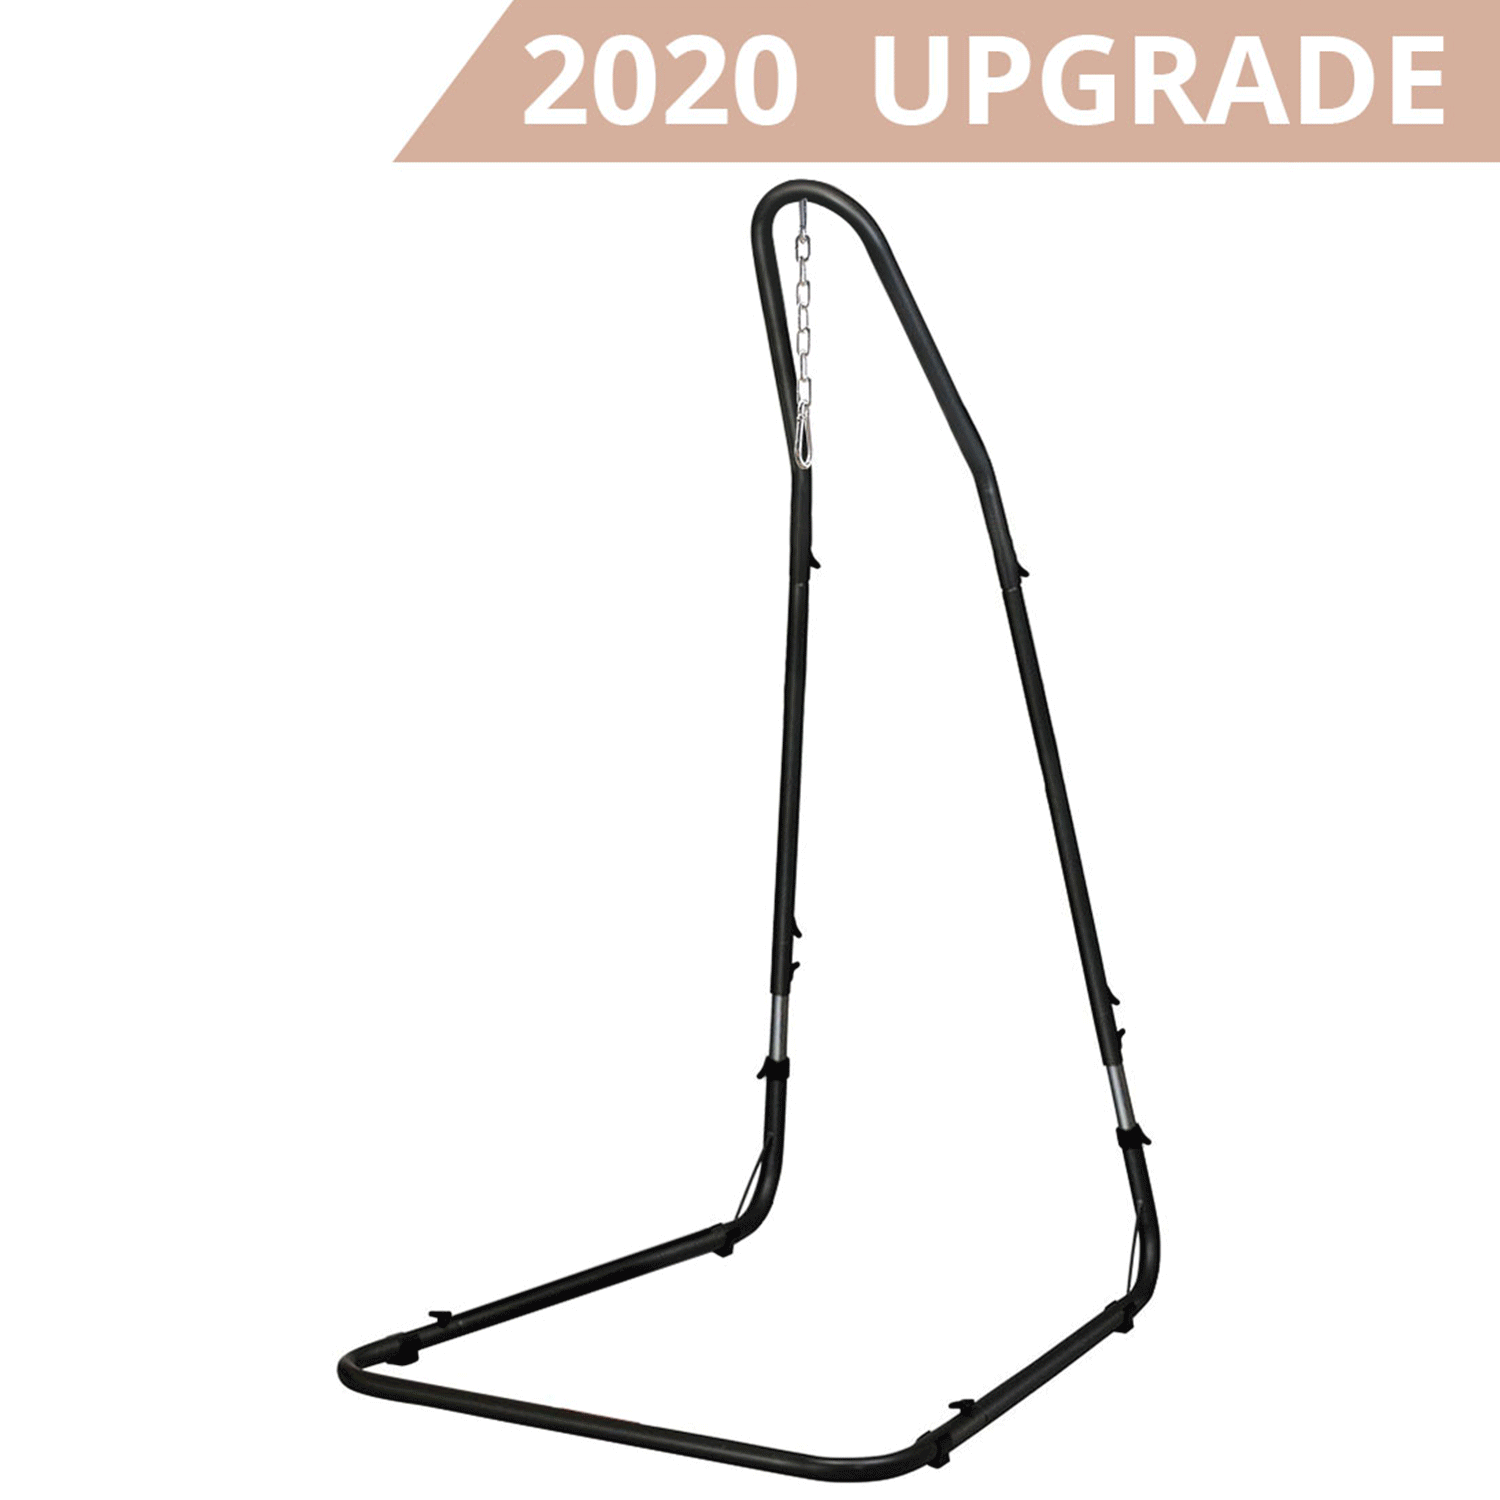 Perfect for Indoor/Outdoor Patio Deck 330 Pound Capacity Yard Zupapa Adjustable Hammock Chair Stand 2020 Upgrade Solid Steel Construction for Hammock Chairs and Swings 